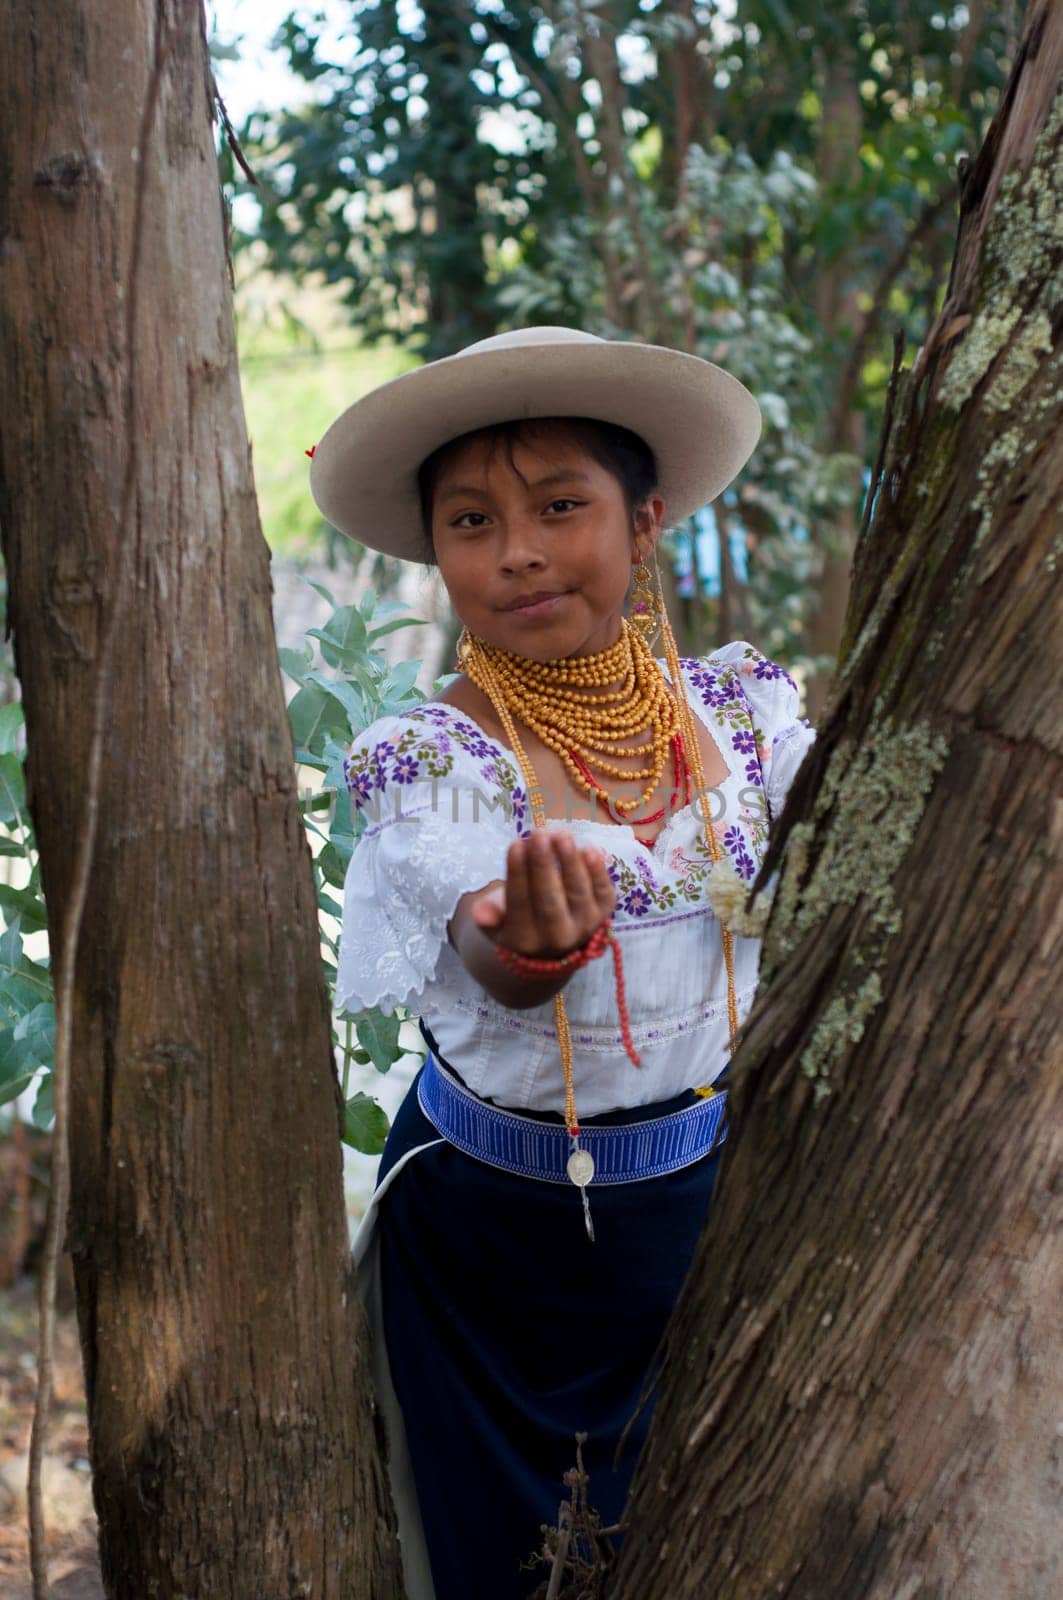 A 13-Year-Old Indigenous Stunner in Ecuadorian Traditional Garb, Posing with a Heartfelt Smile Amidst Towering Trees and Nature's Treasures. High quality photo